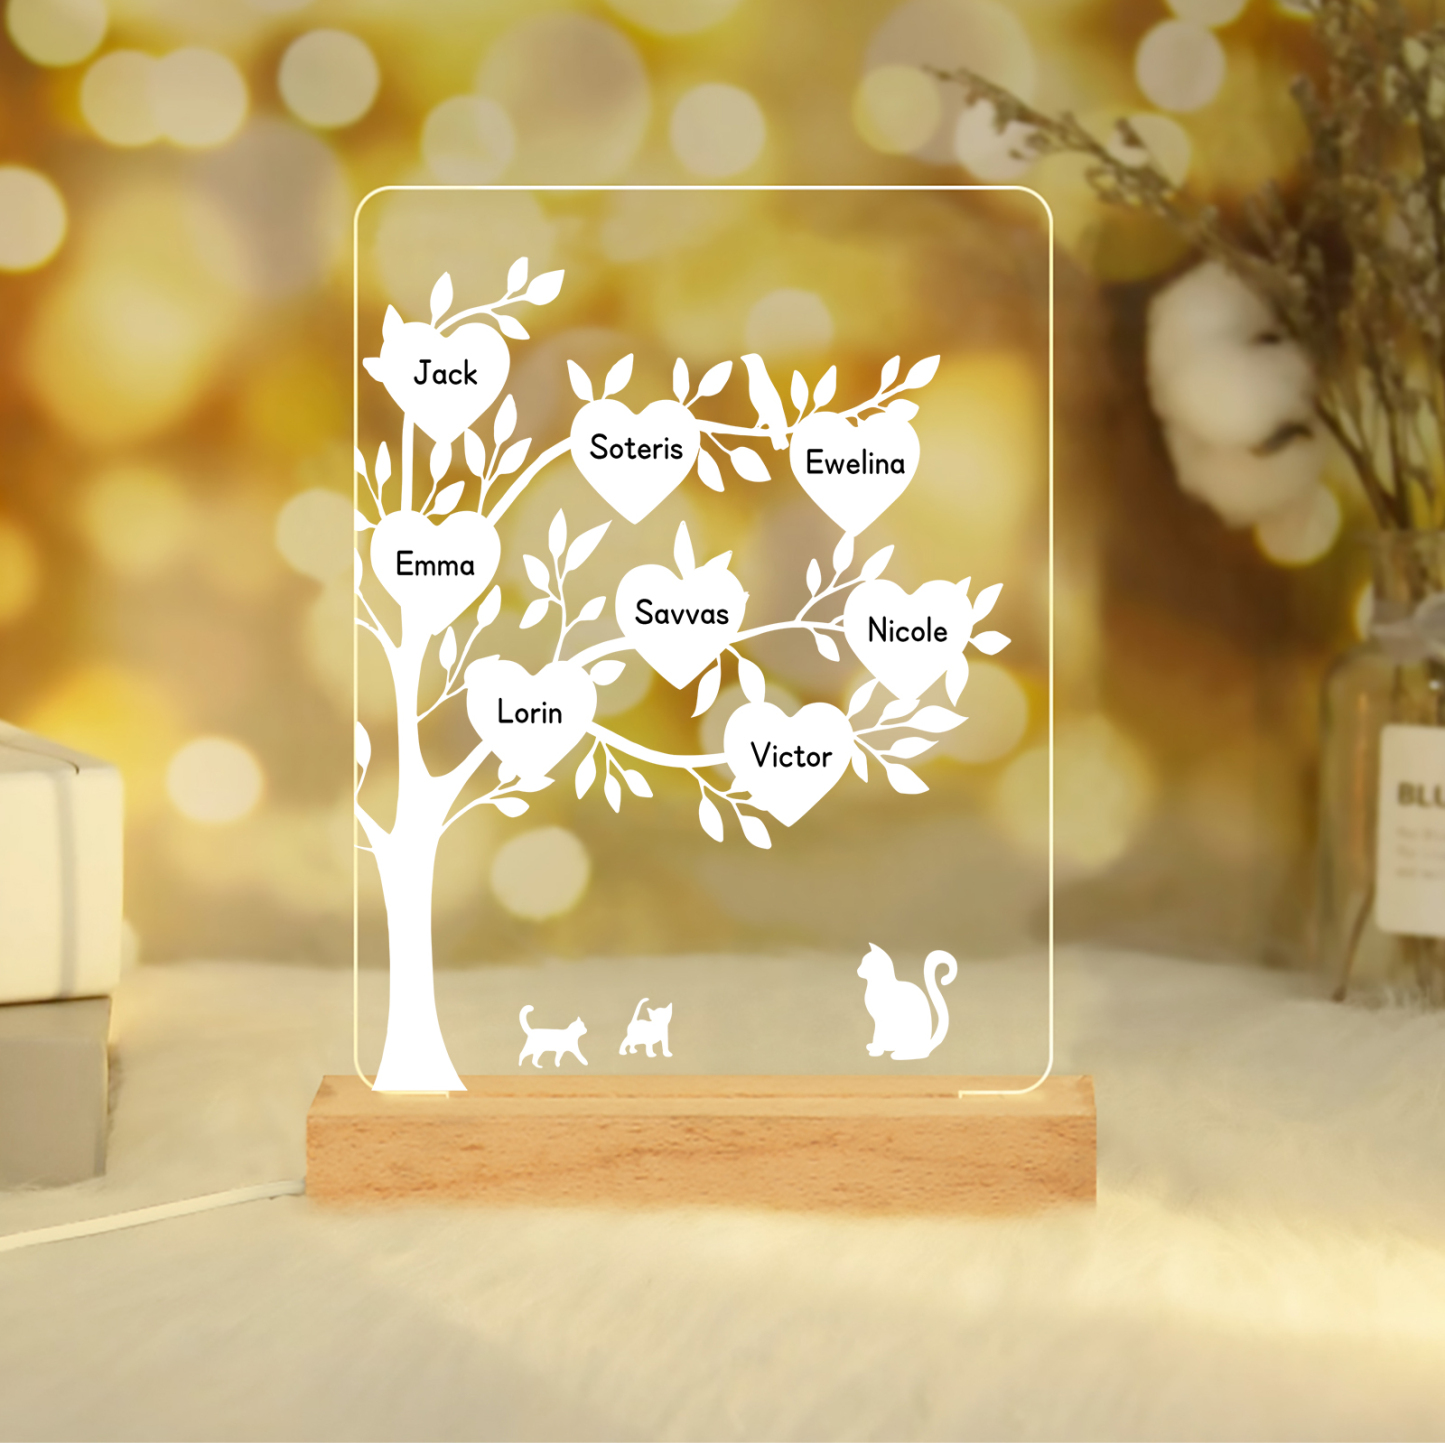 8 Names - Personalized Leaf Style Night Light With Custom Text LED Light Gift For Family